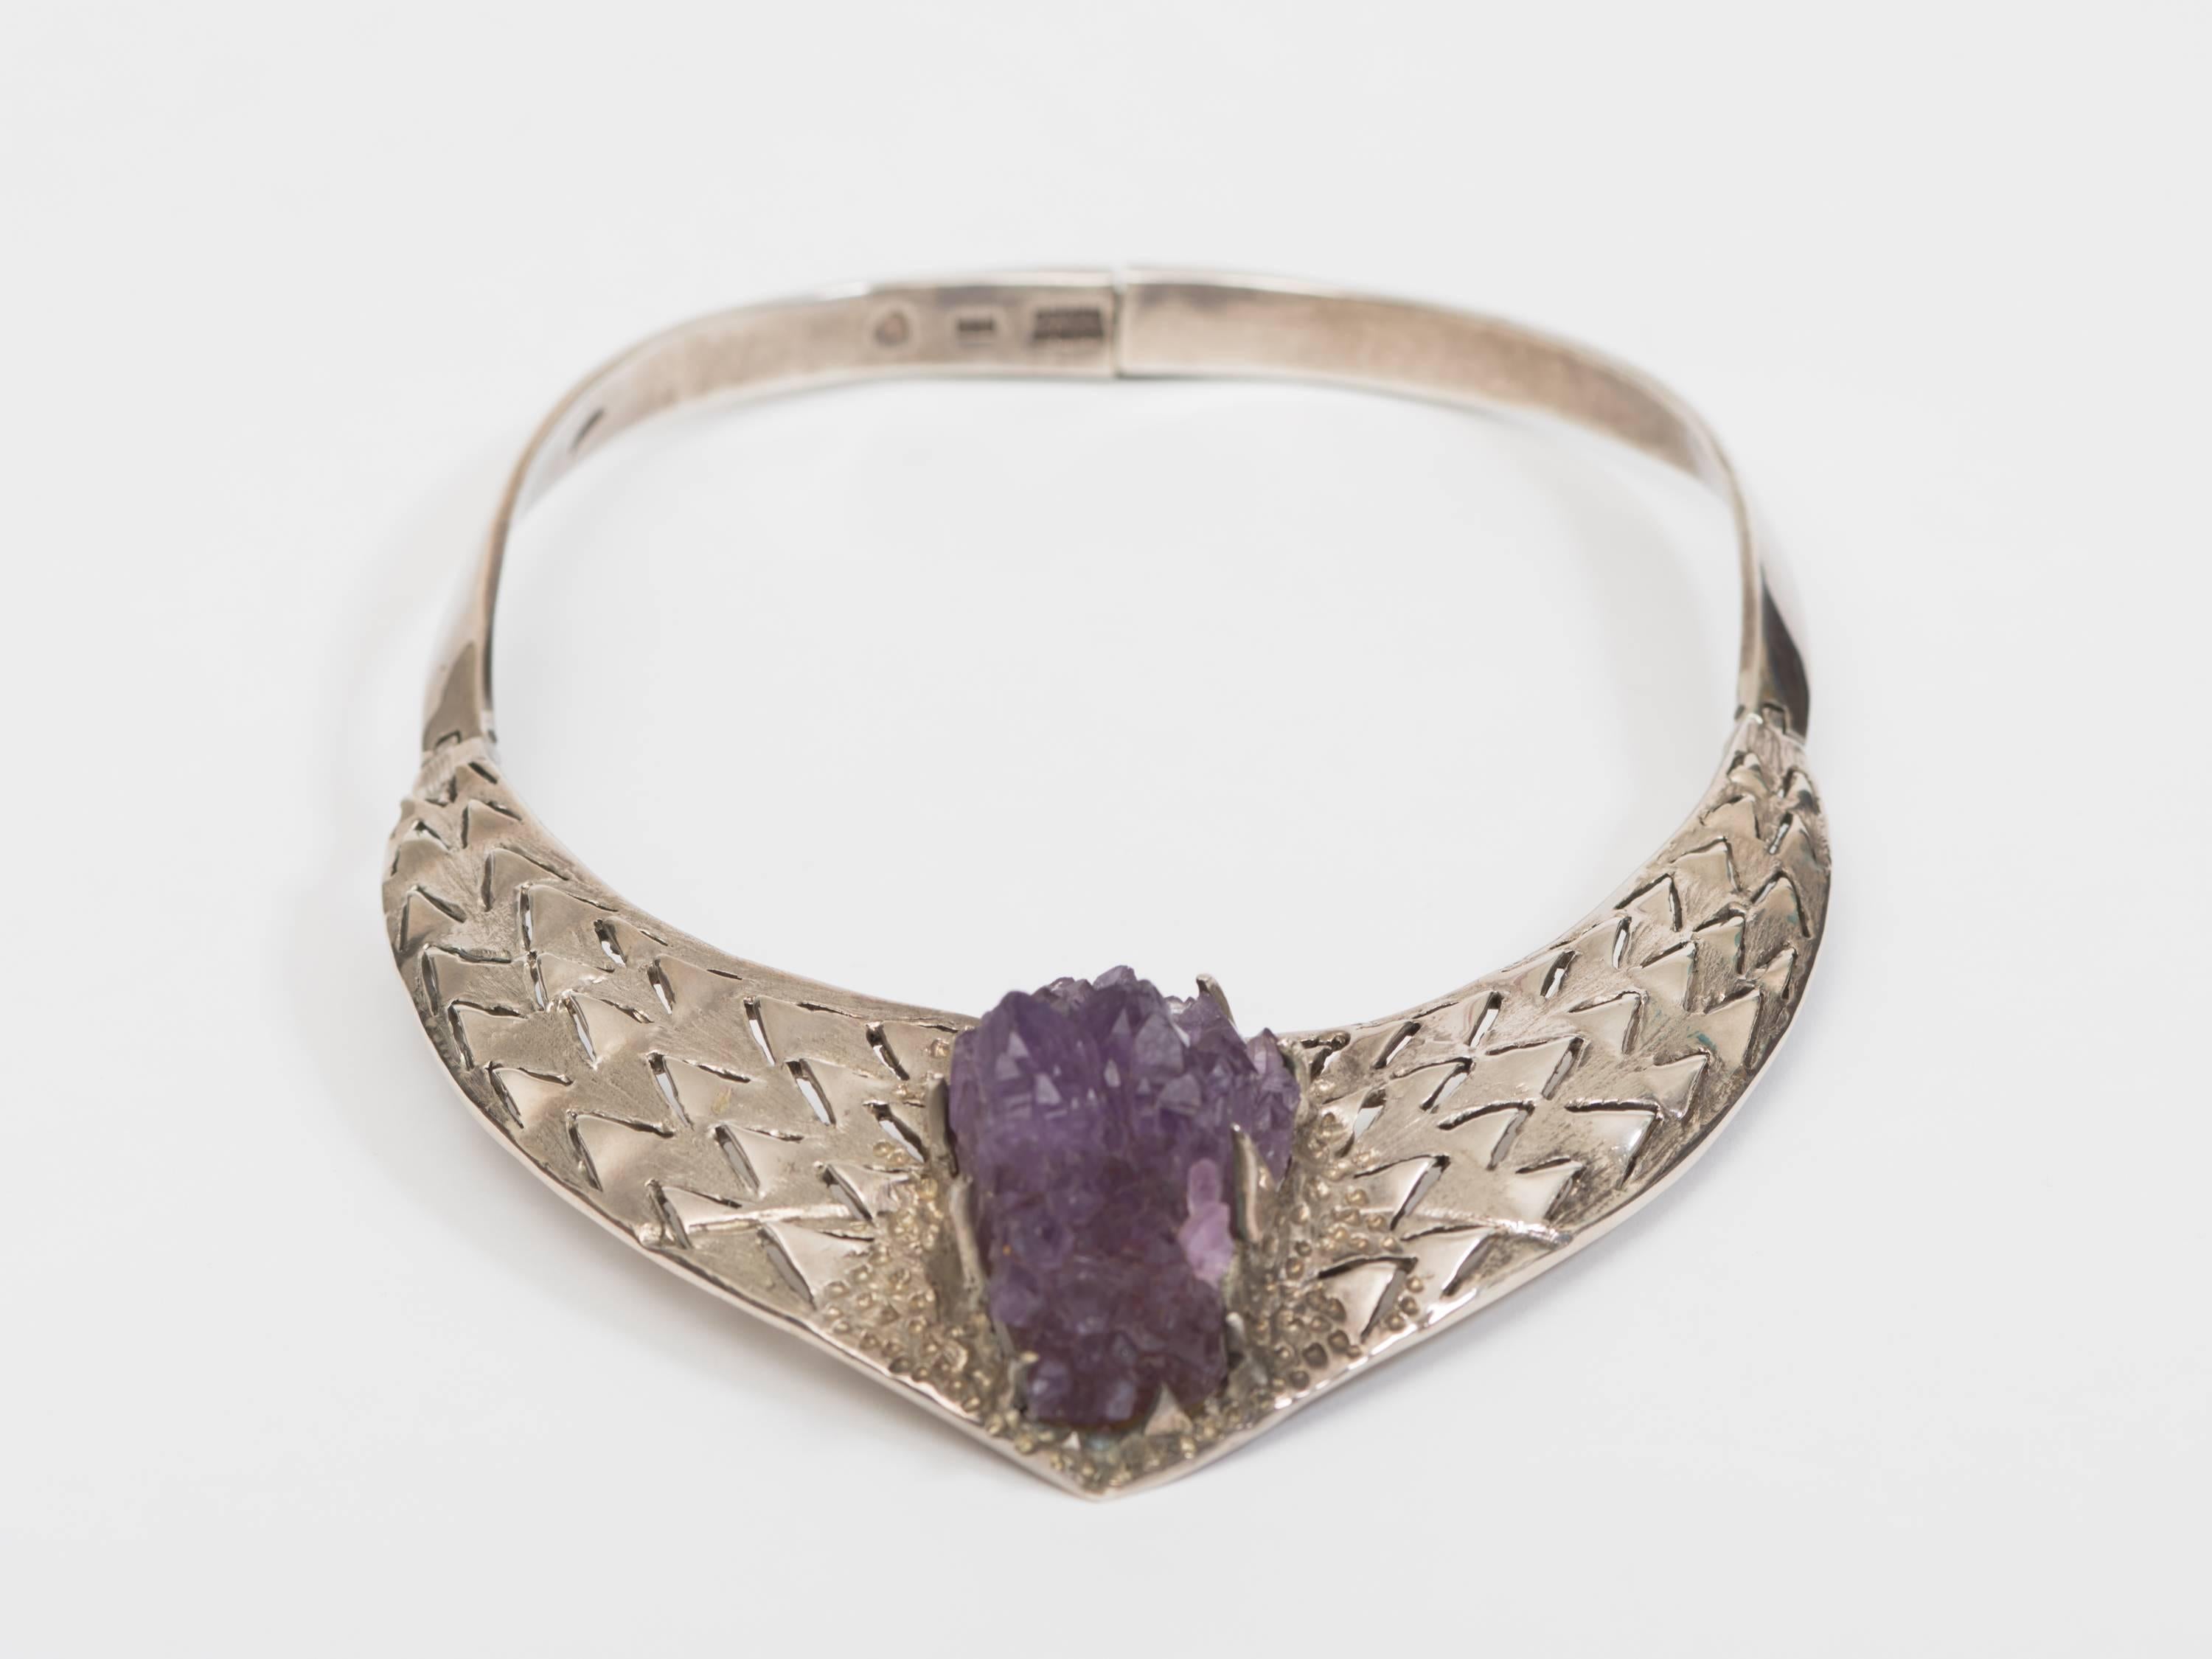 Rare 1970's Brutalist silver and amethyst necklace with hinged clasp. Handcrafted by Josefina Zagal, Taxco, Mexico